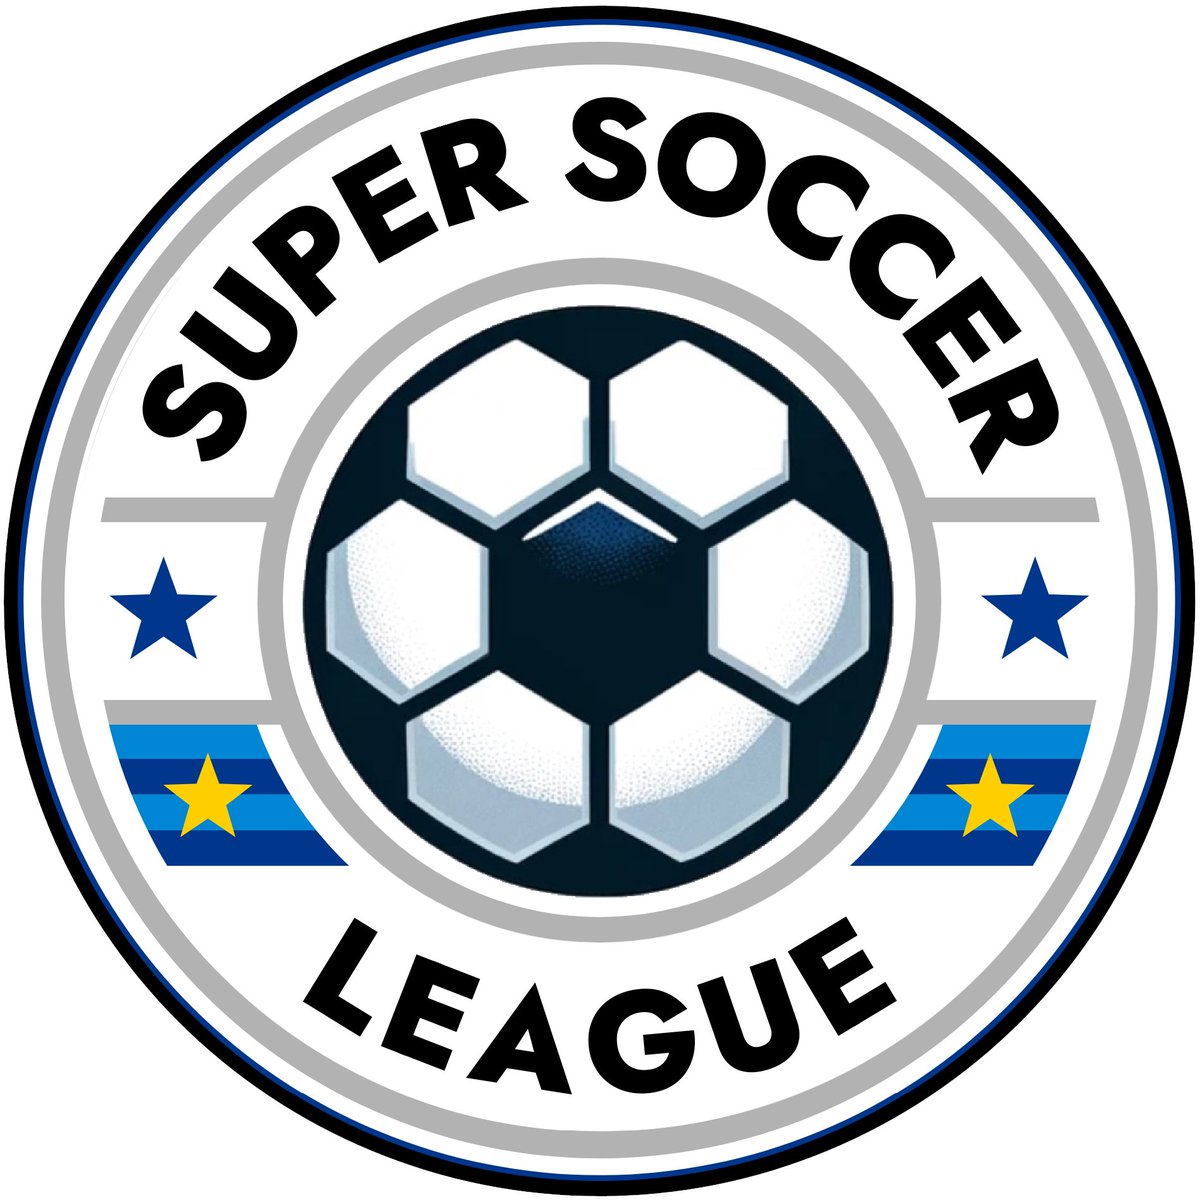 We just updated the link to @LeagueMaryland site. Great new look with this spring's schedules for all of their divisions. supersoccerleague.org